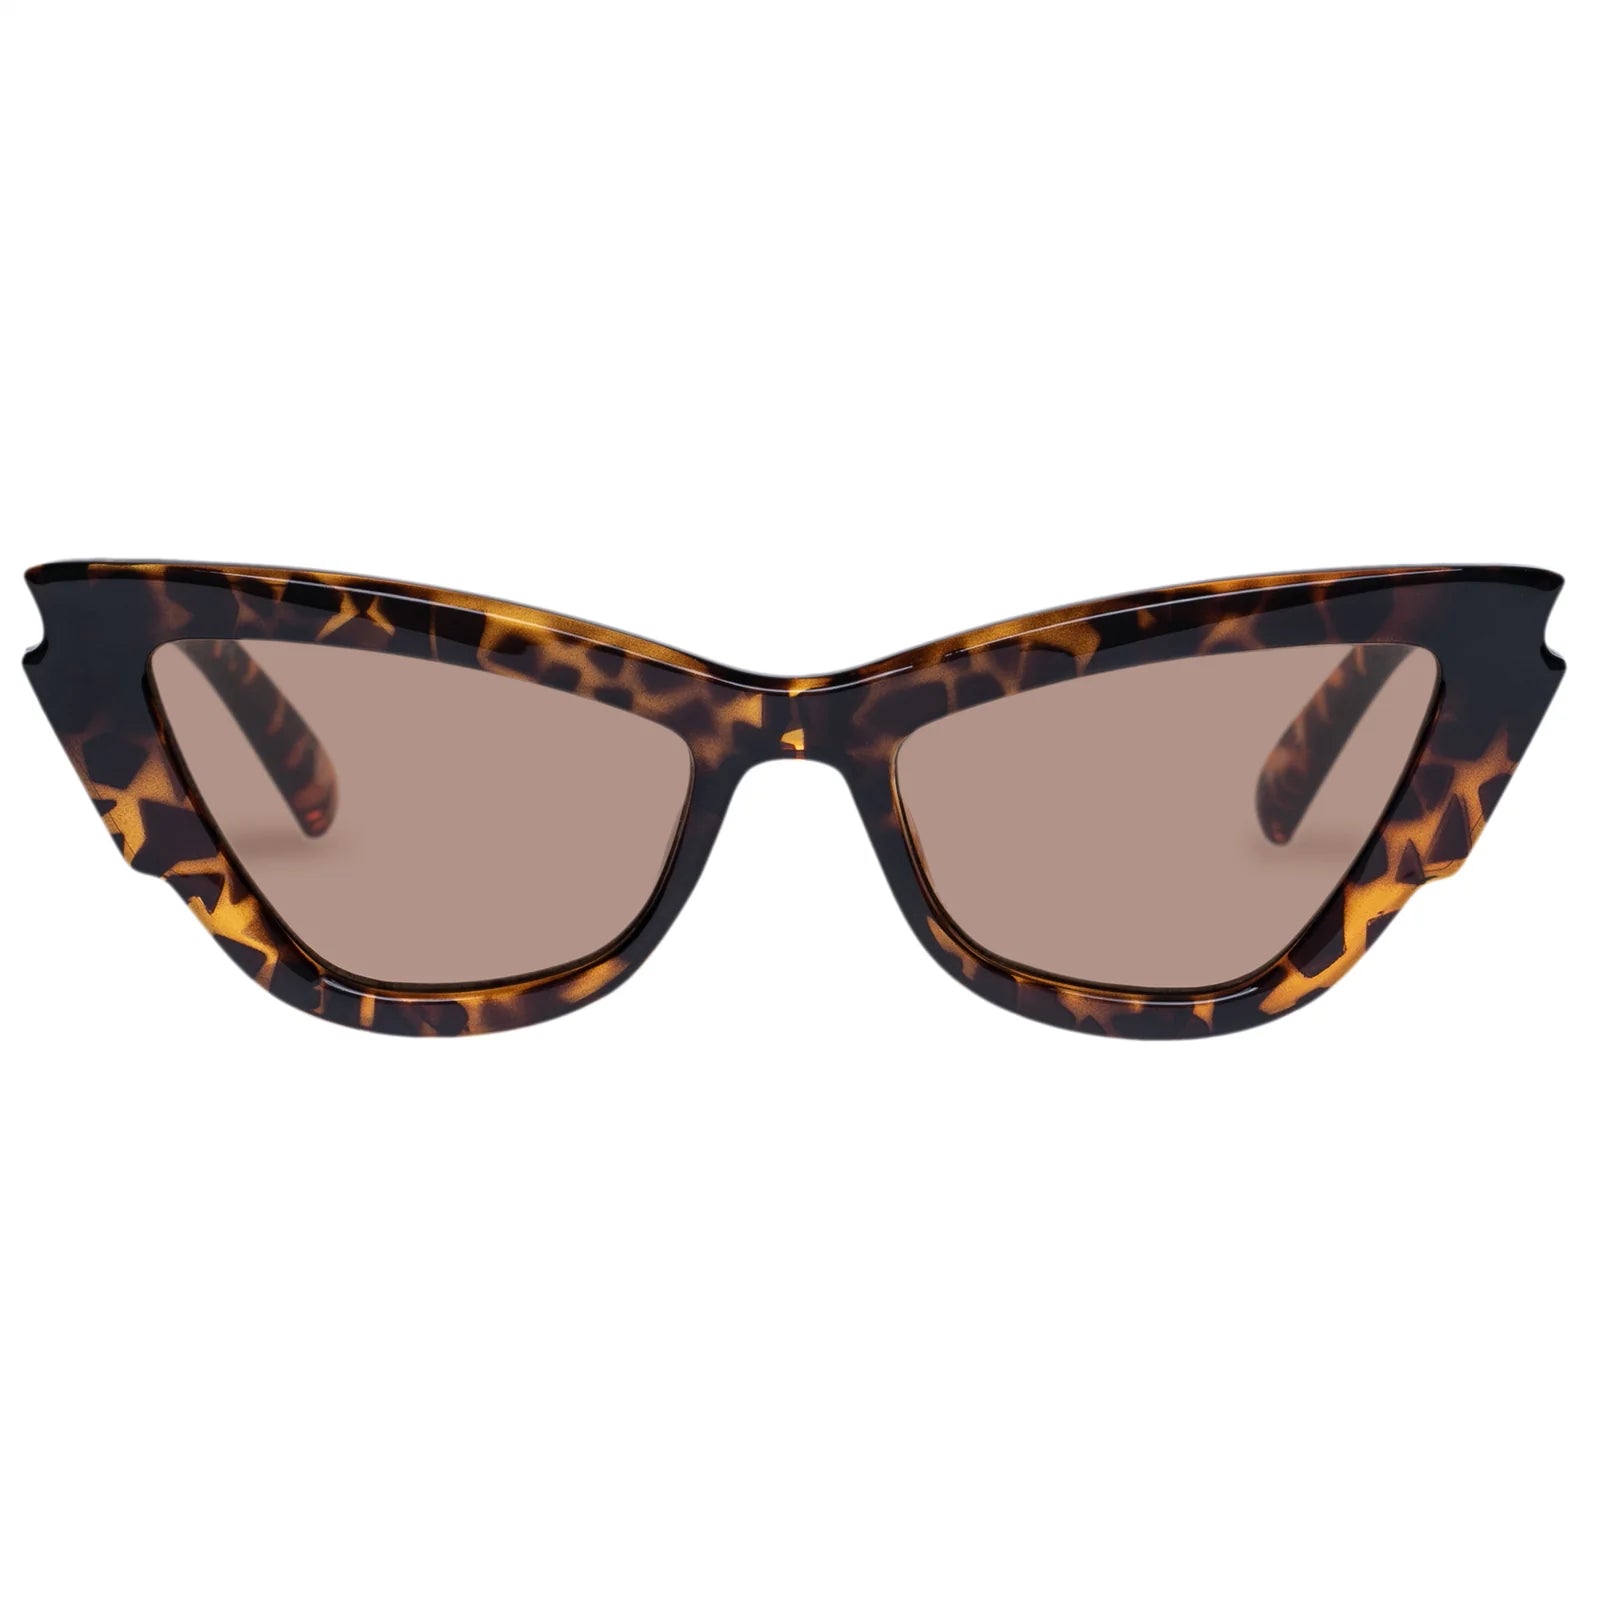 Le Specs Lost Days Sunglasses in Leopard Tort